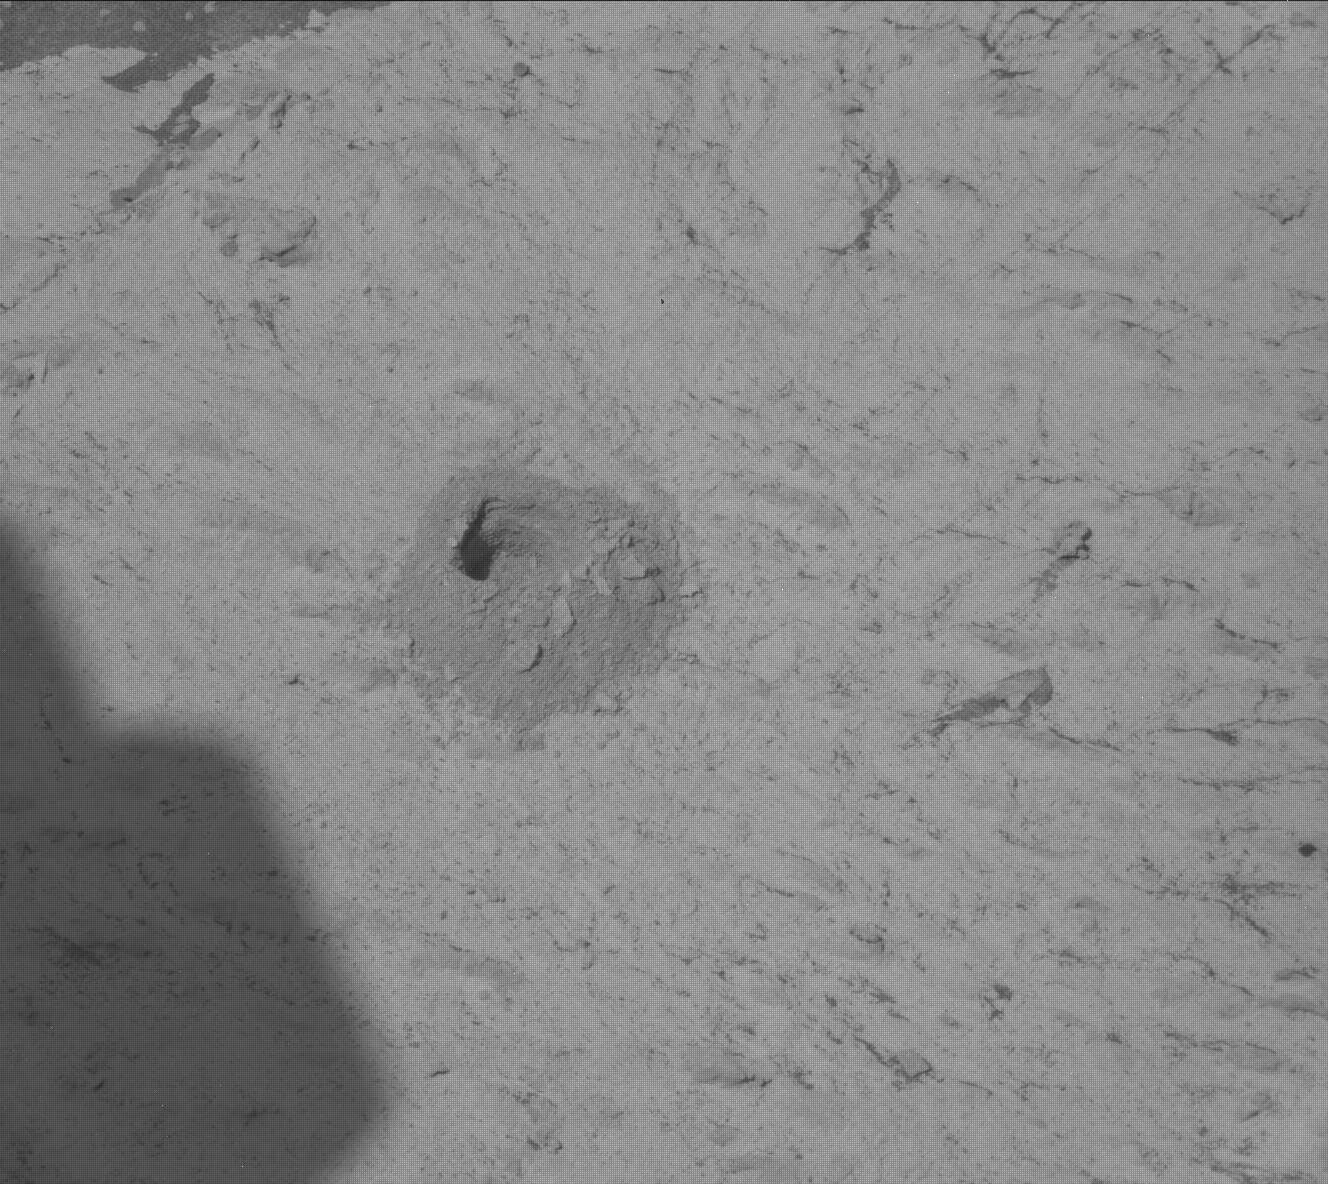 This black and white image shows a quarter-size drill hole on the rocky, sandy surface of Mars. Curiosity's shadow is also present in the bottom left corner of the image.